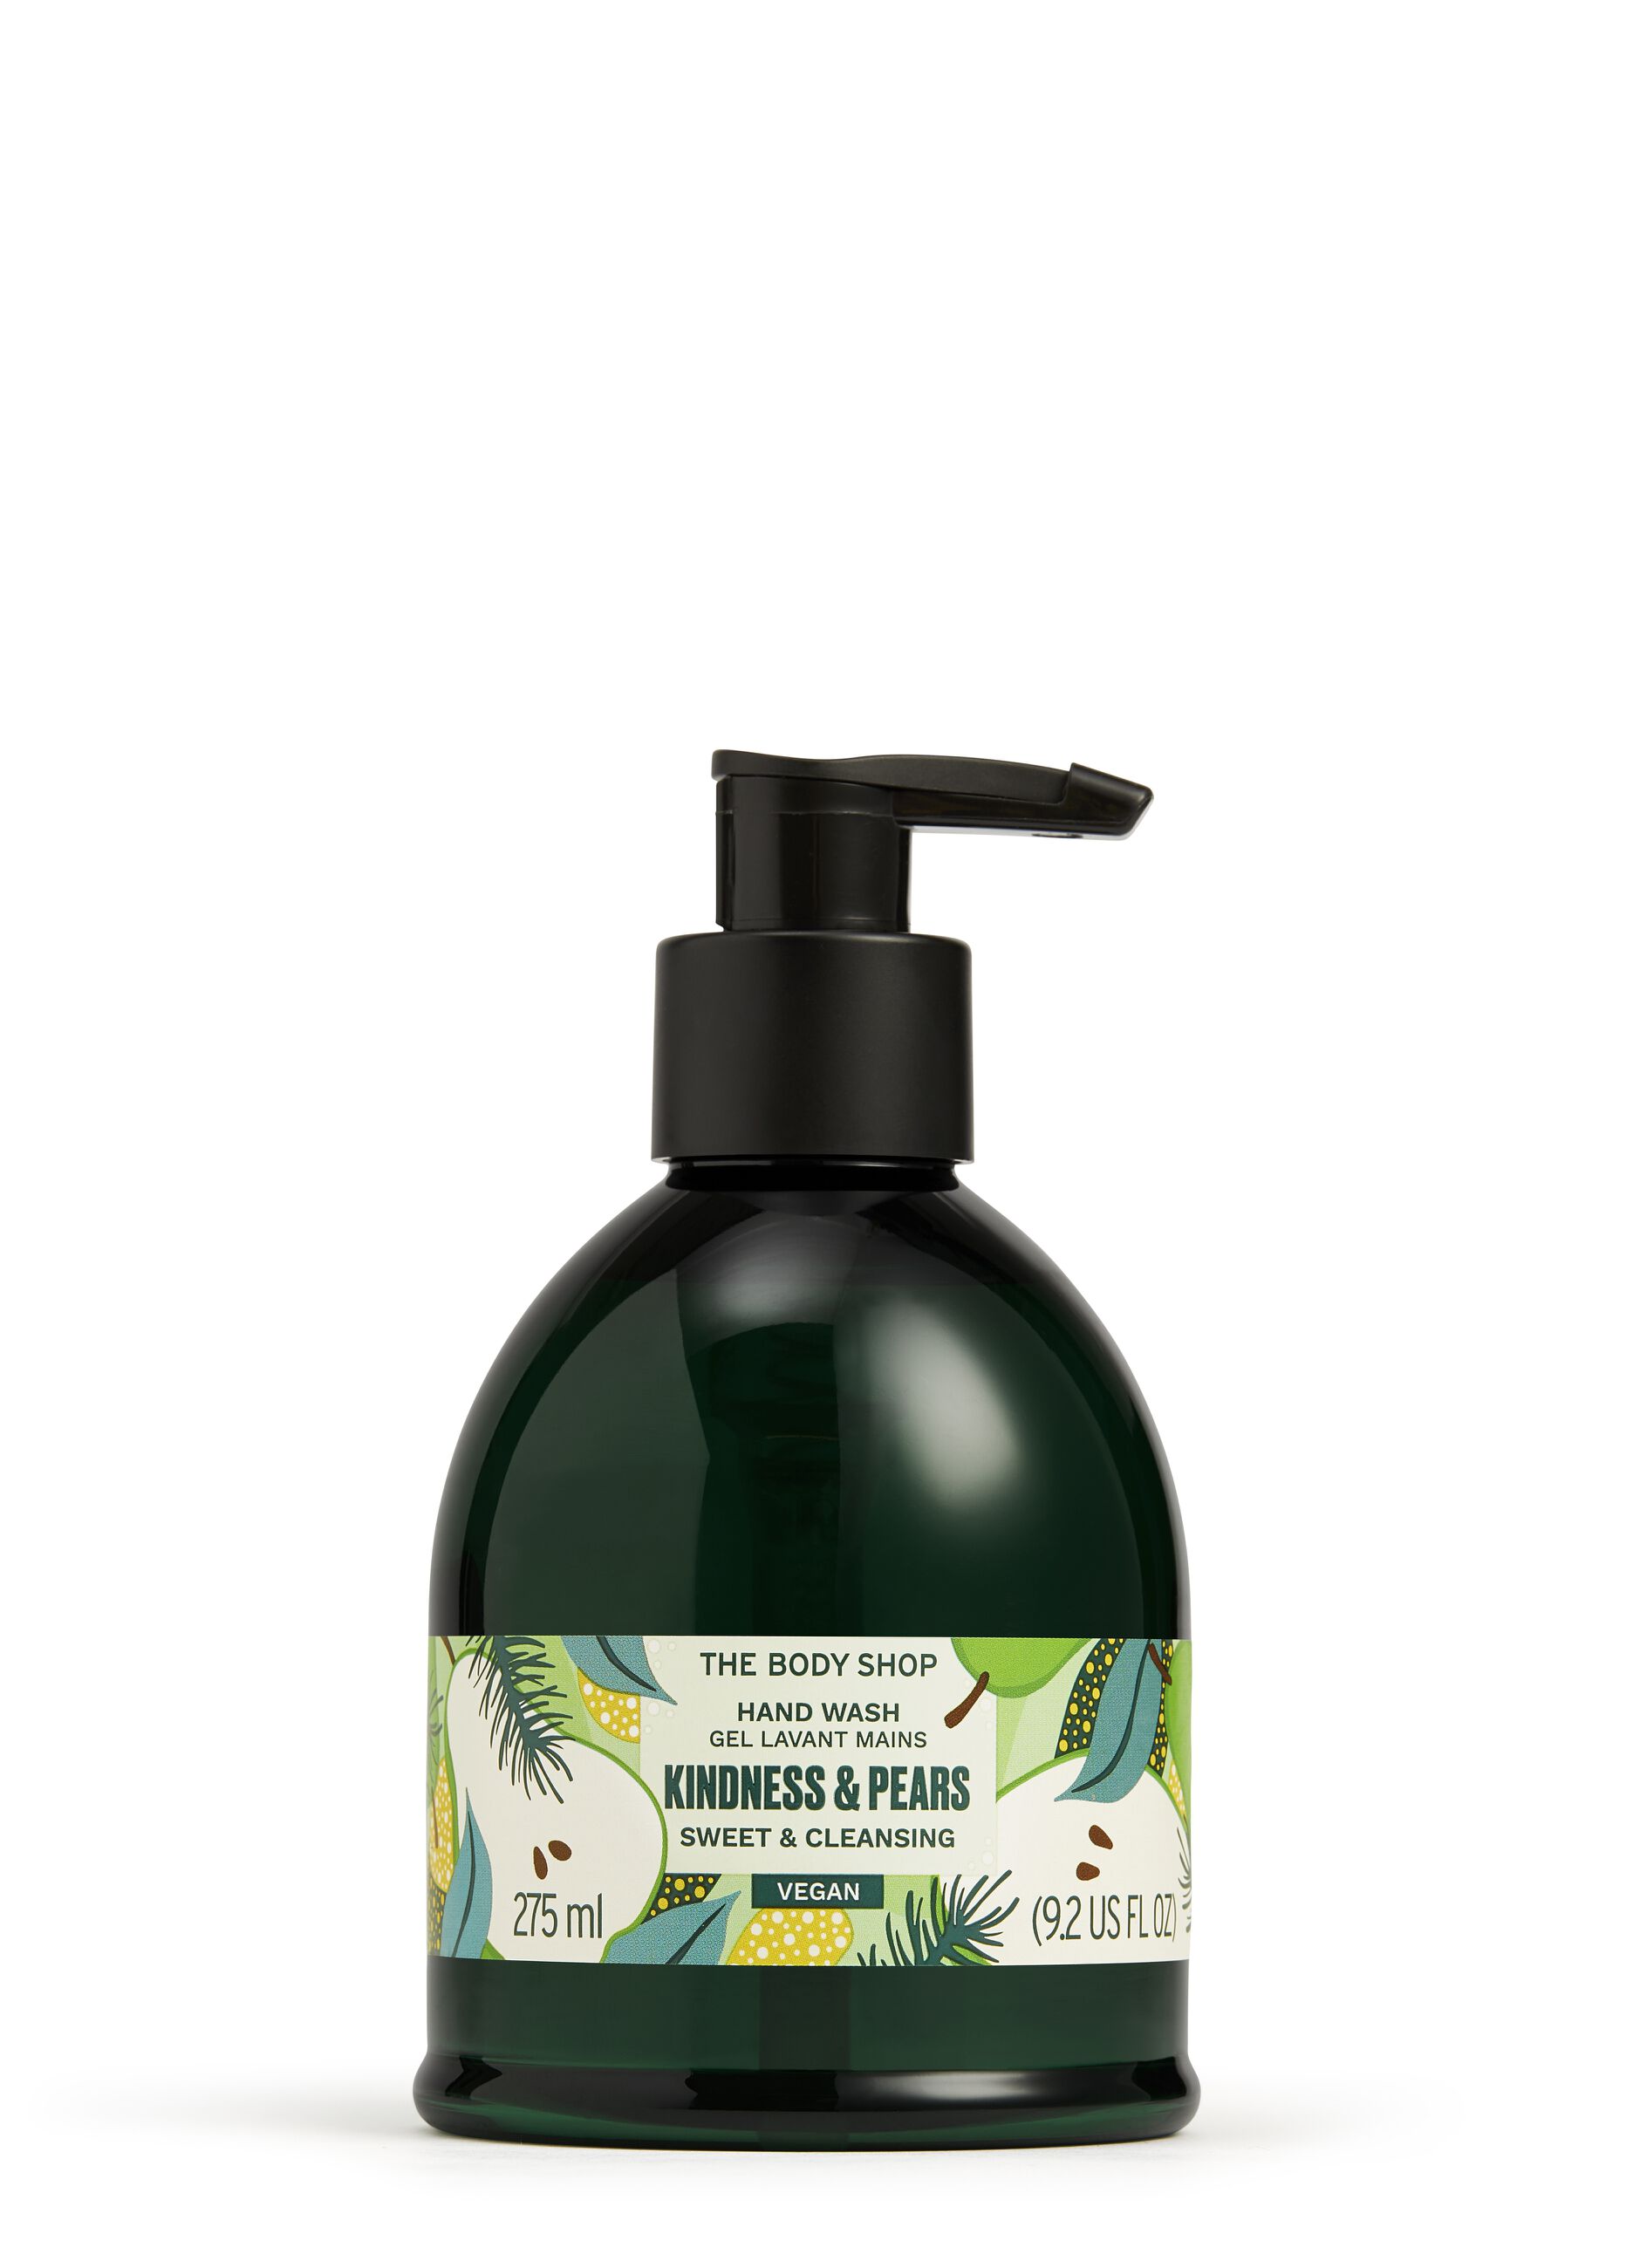 The Body Shop Kindness & Pears hand cleanser 275ml